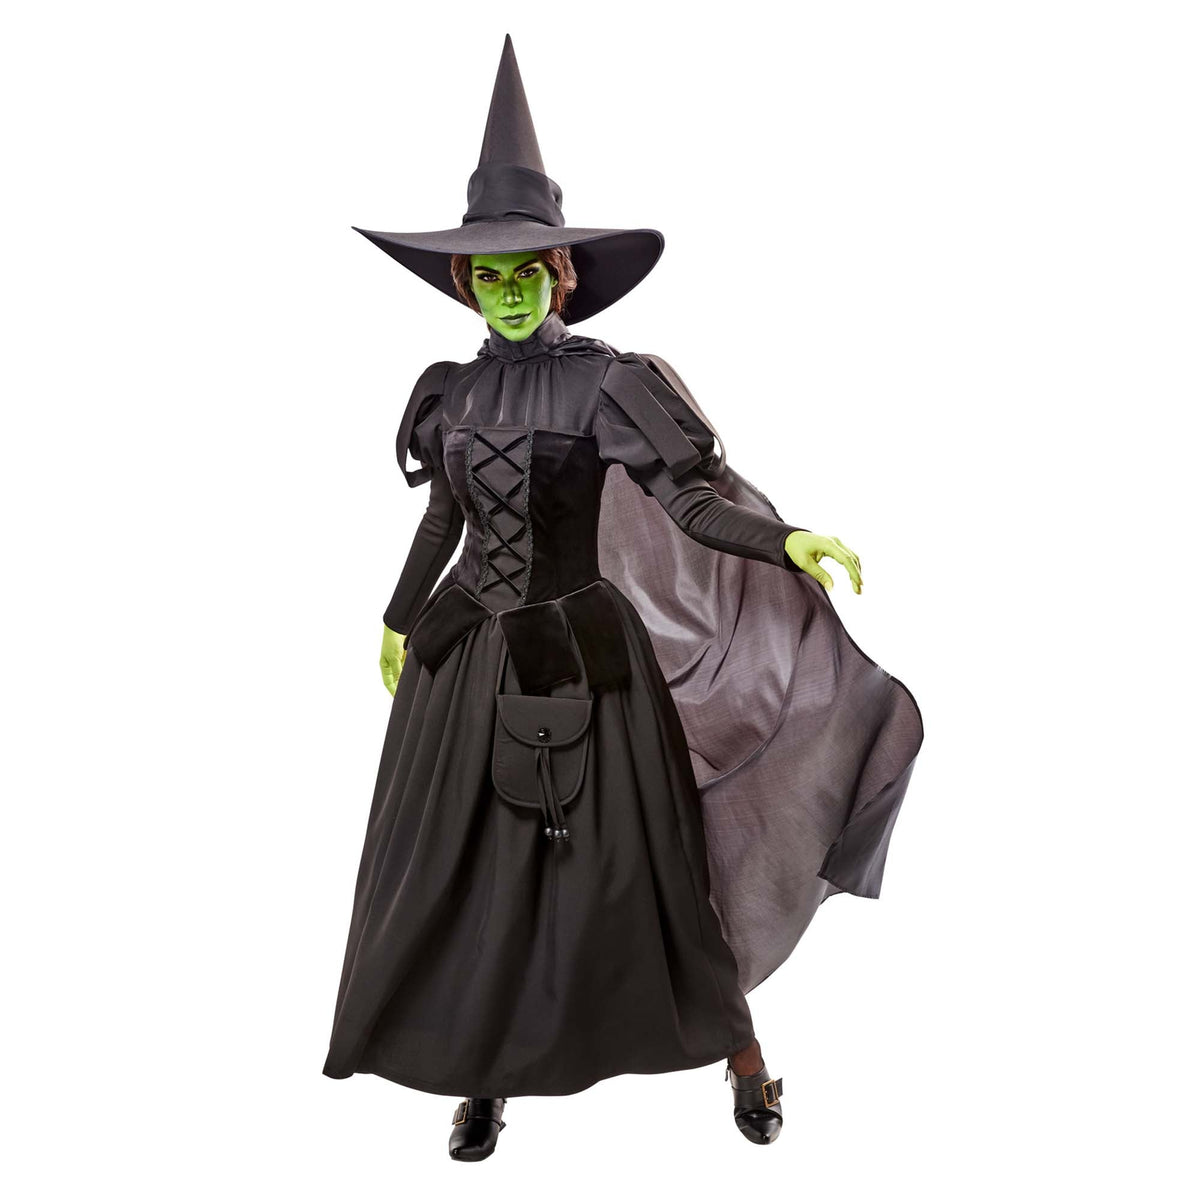 RUBIES II (Ruby Slipper Sales) Costumes Wicked Elphaba Deluxe Costume for Adults, Black Dress